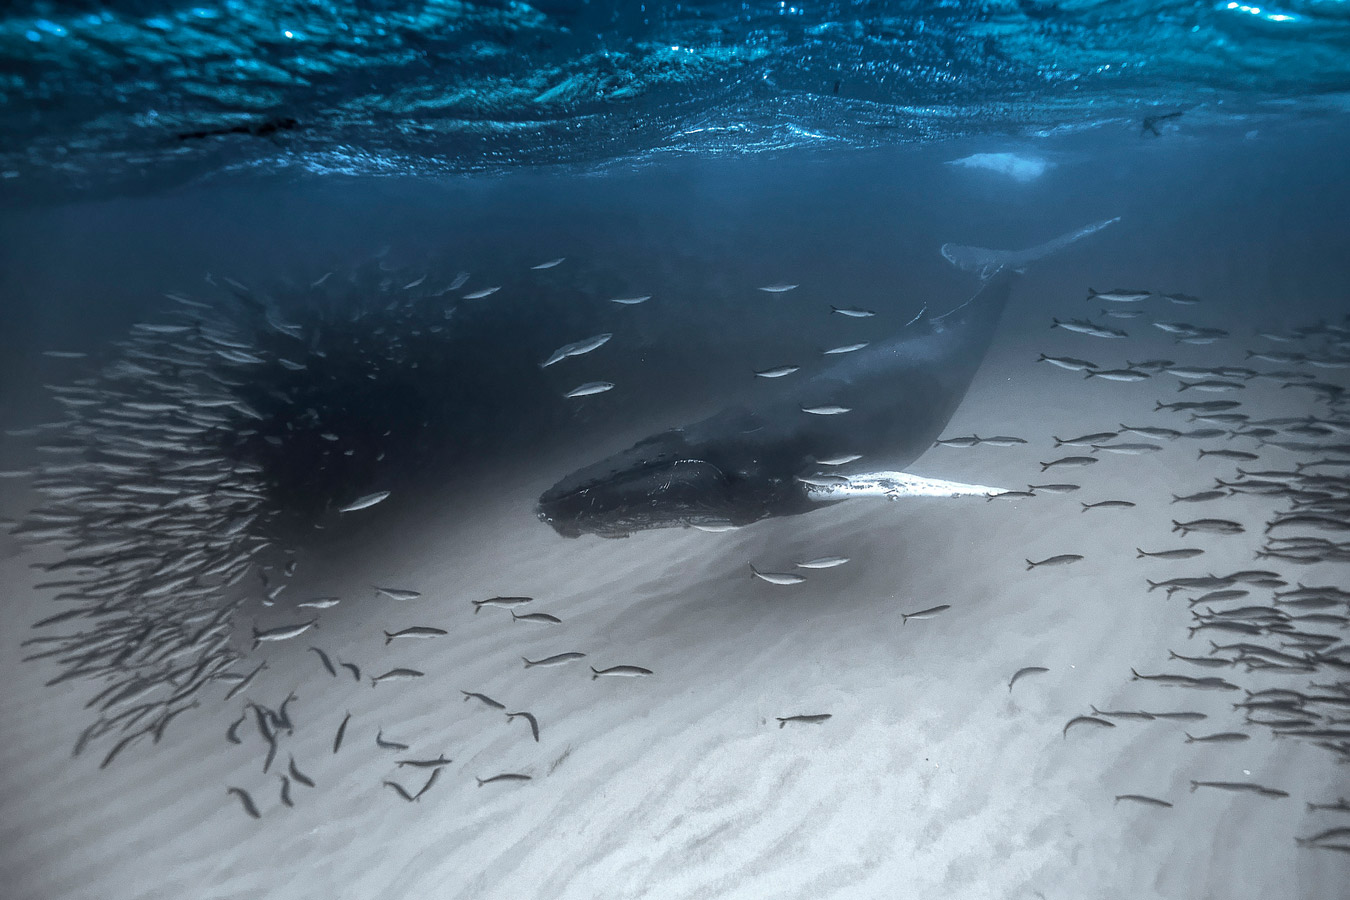 Frozen Hunting, © Fabrice Guerin, Aunay Sous Auneau, France, First Place Amateur : Beaches/Underwater, The Great Outdoors: Landscape & Wildlife Photography Contest